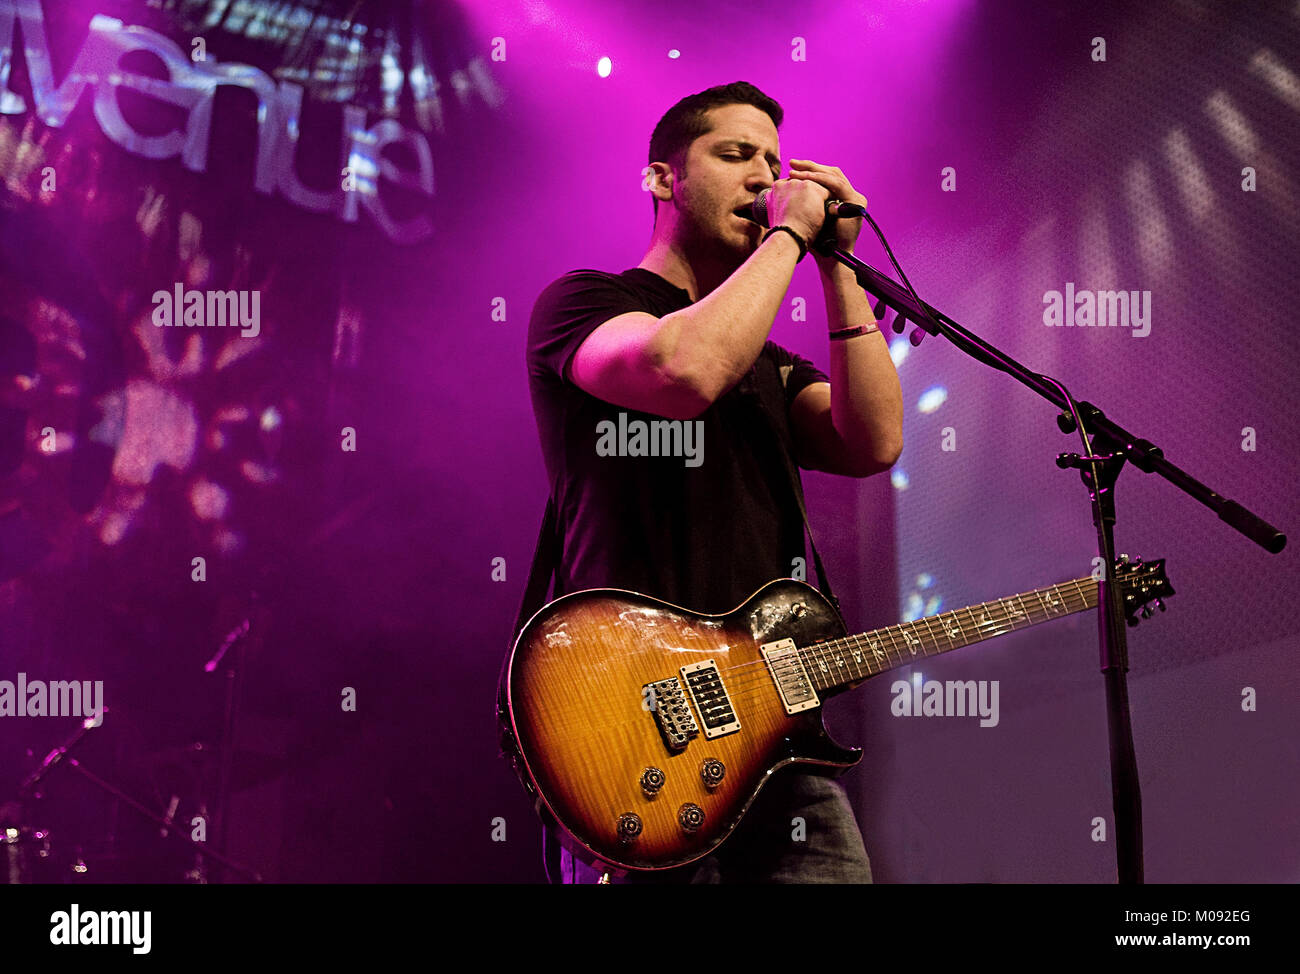 The American rock band Boyce Avenue performs a live concert at Sankt Peter  in Frankfurt. Here guitarist and lead singer Alejandro Manzano is pictured  live on stage. Germany, 08/11 2010 Stock Photo - Alamy